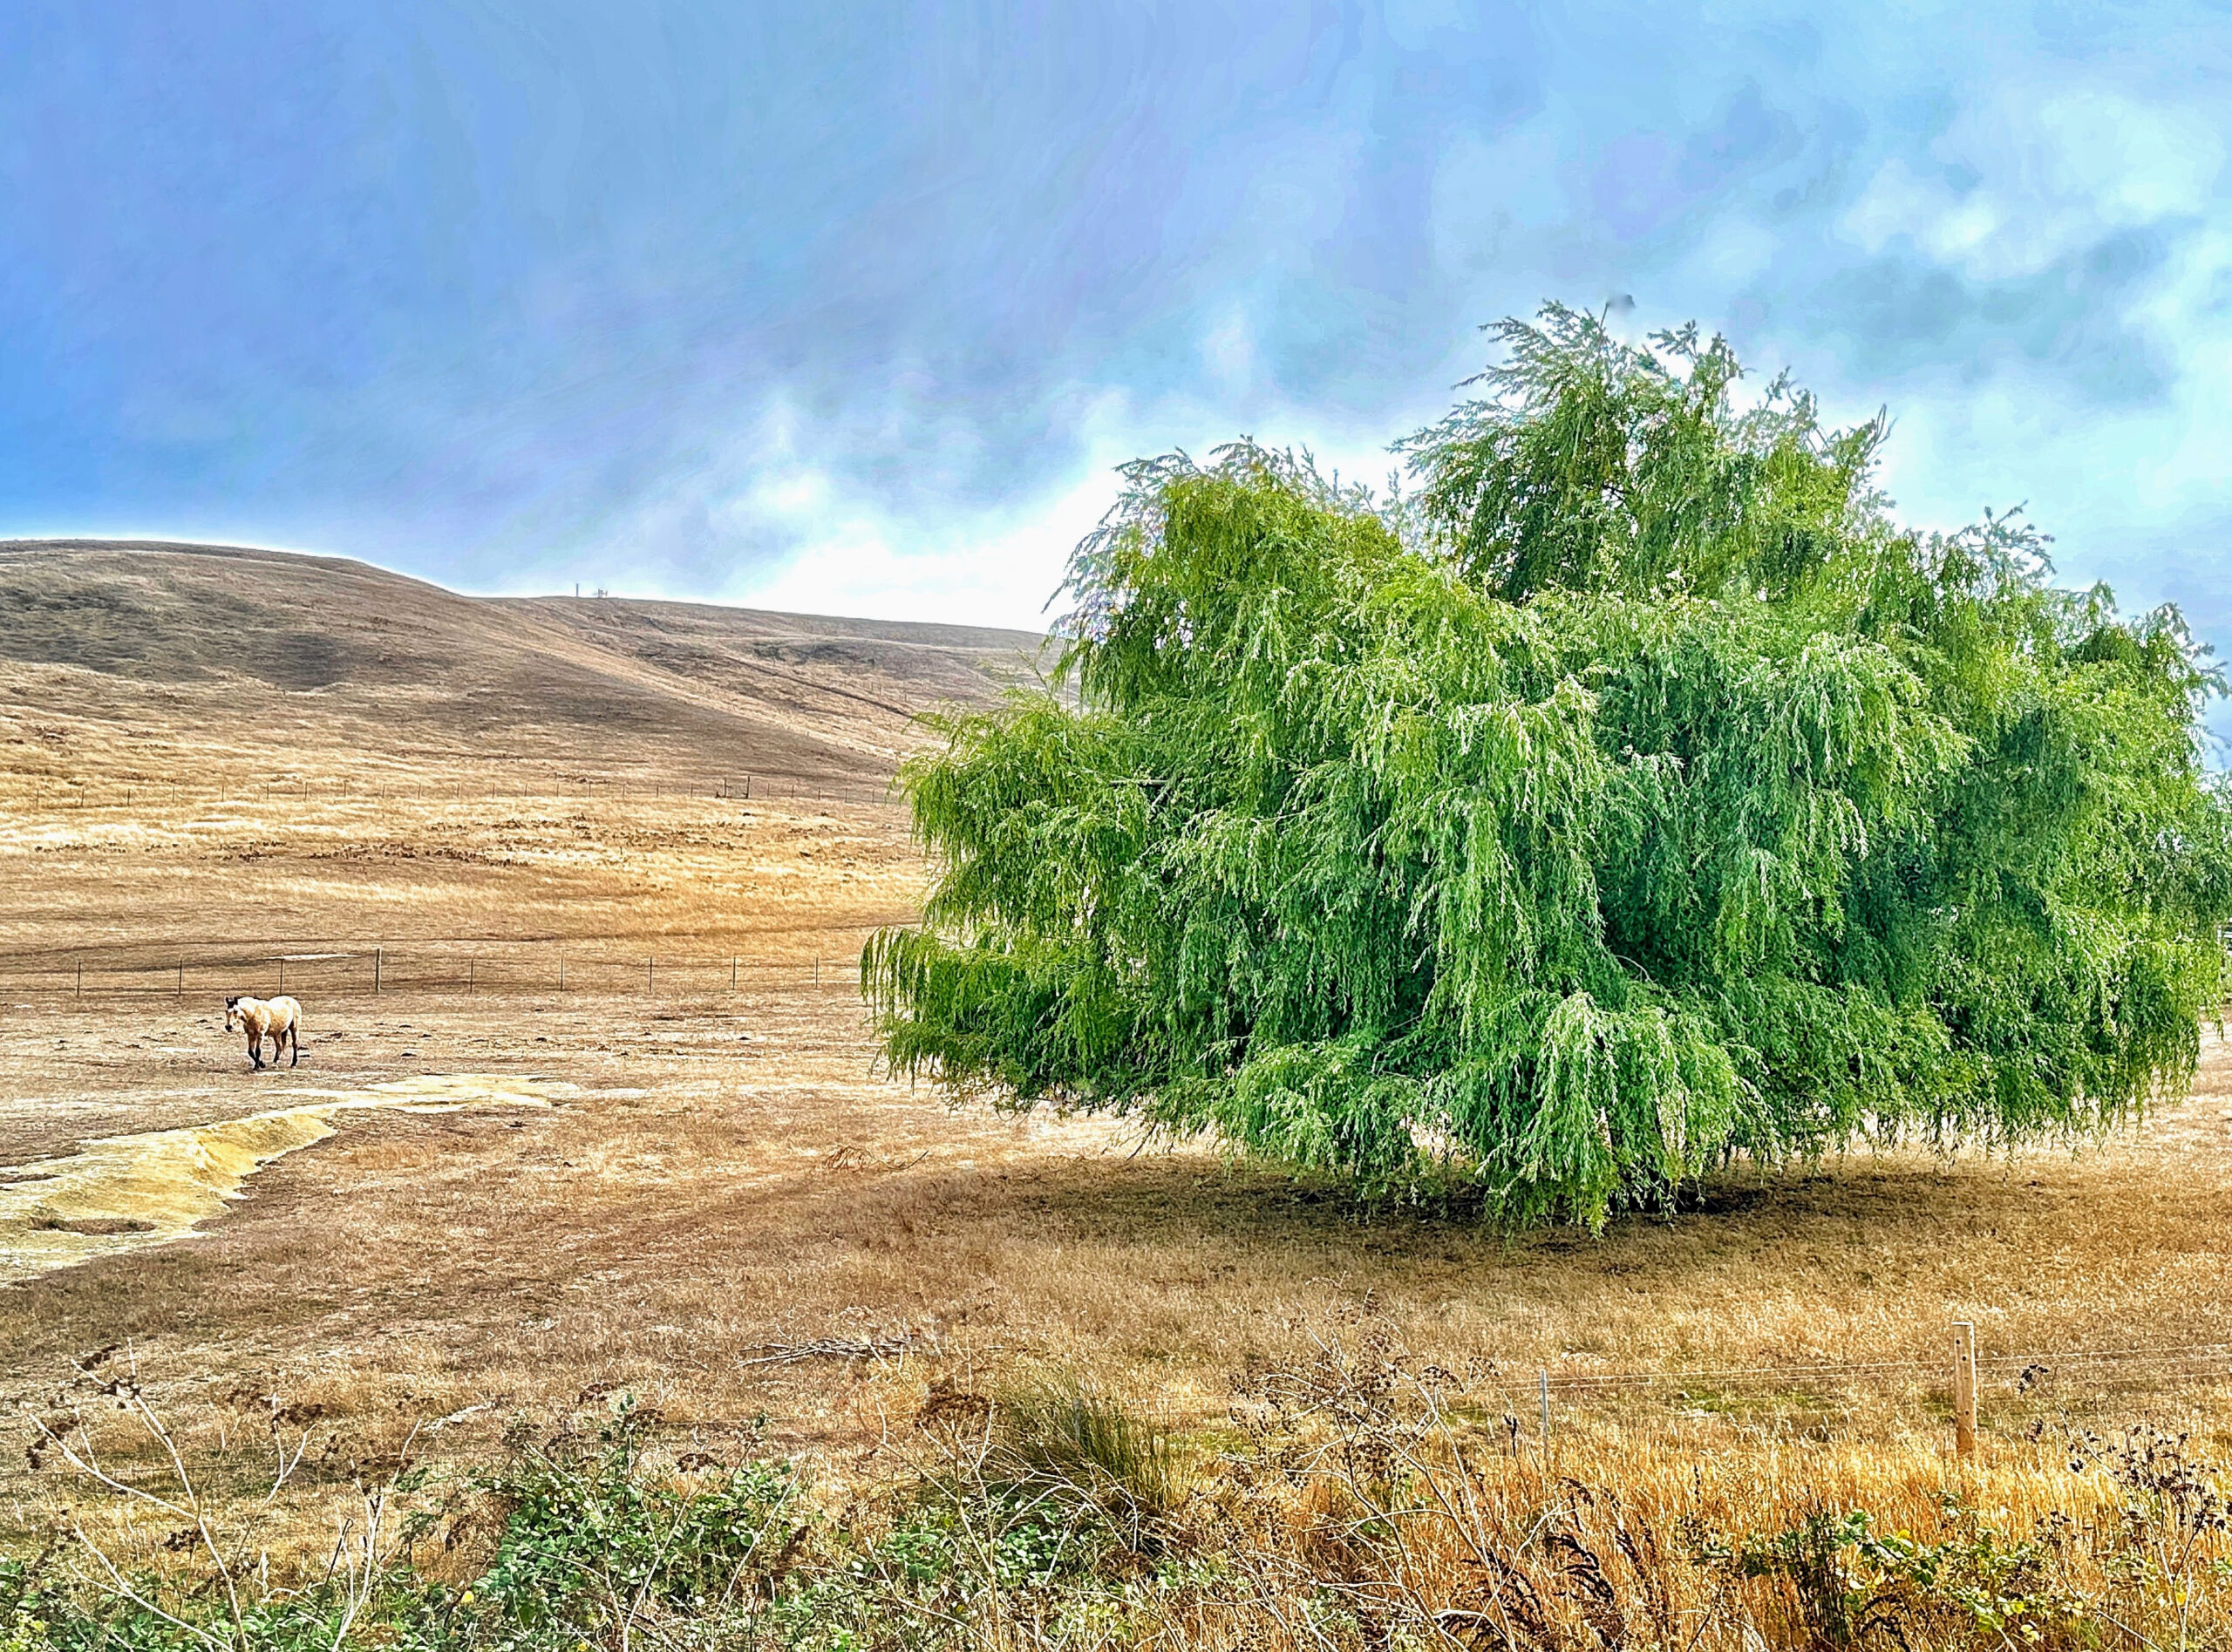 A large willow tree in the middle of a field.